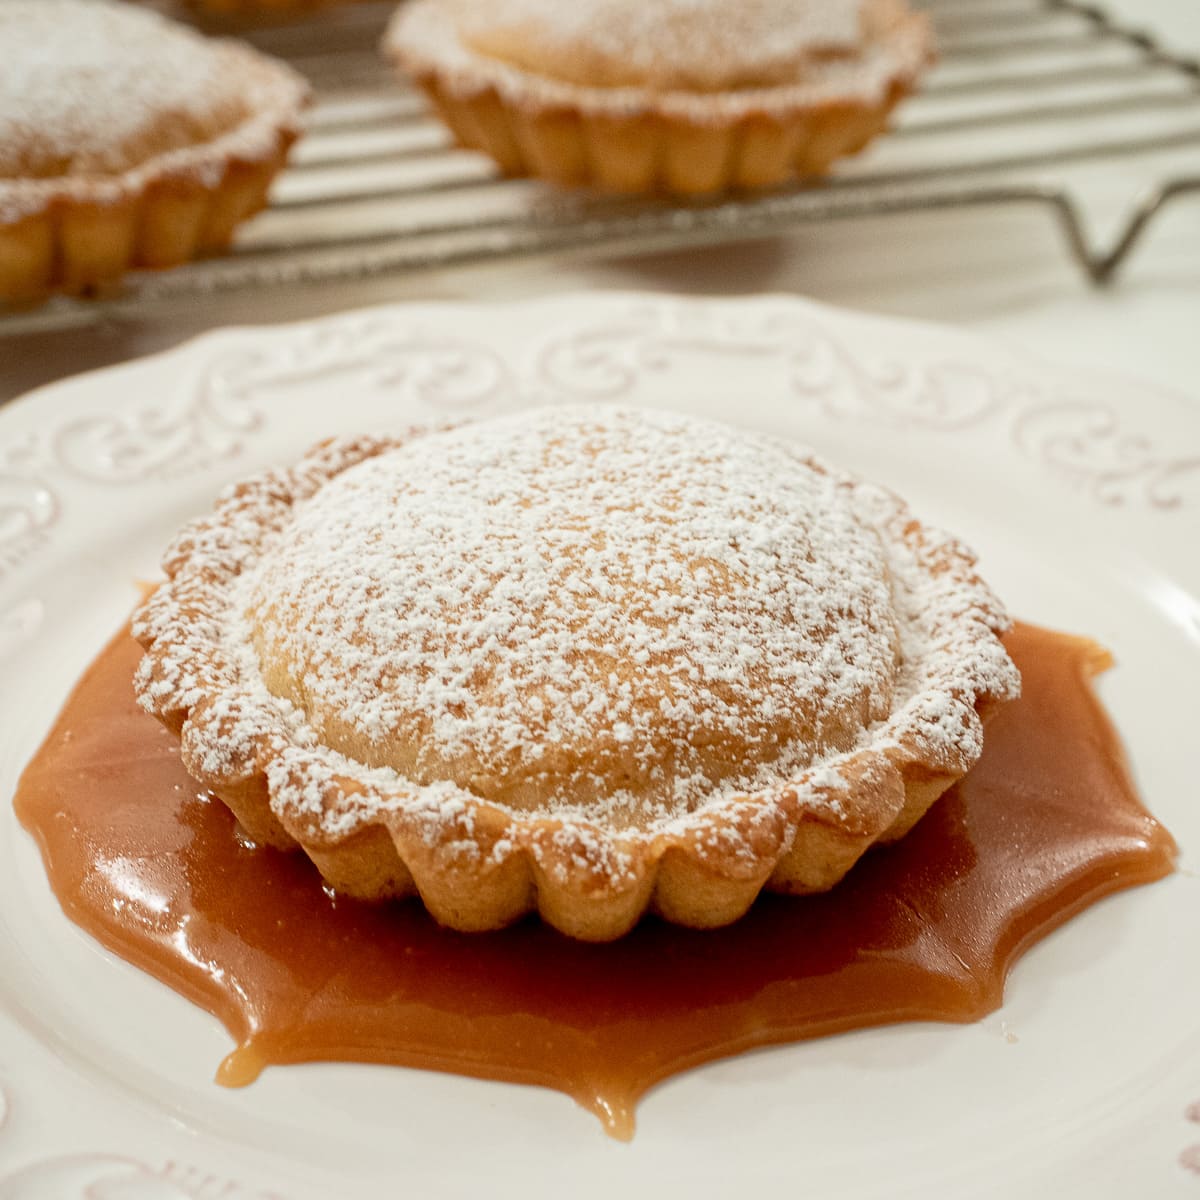 These individual Brown Butter Tarts feature a butter crust filled with brickle bits and a browned butter filling.  They are lightly dusted with powdered sugar and served with caramel sauce